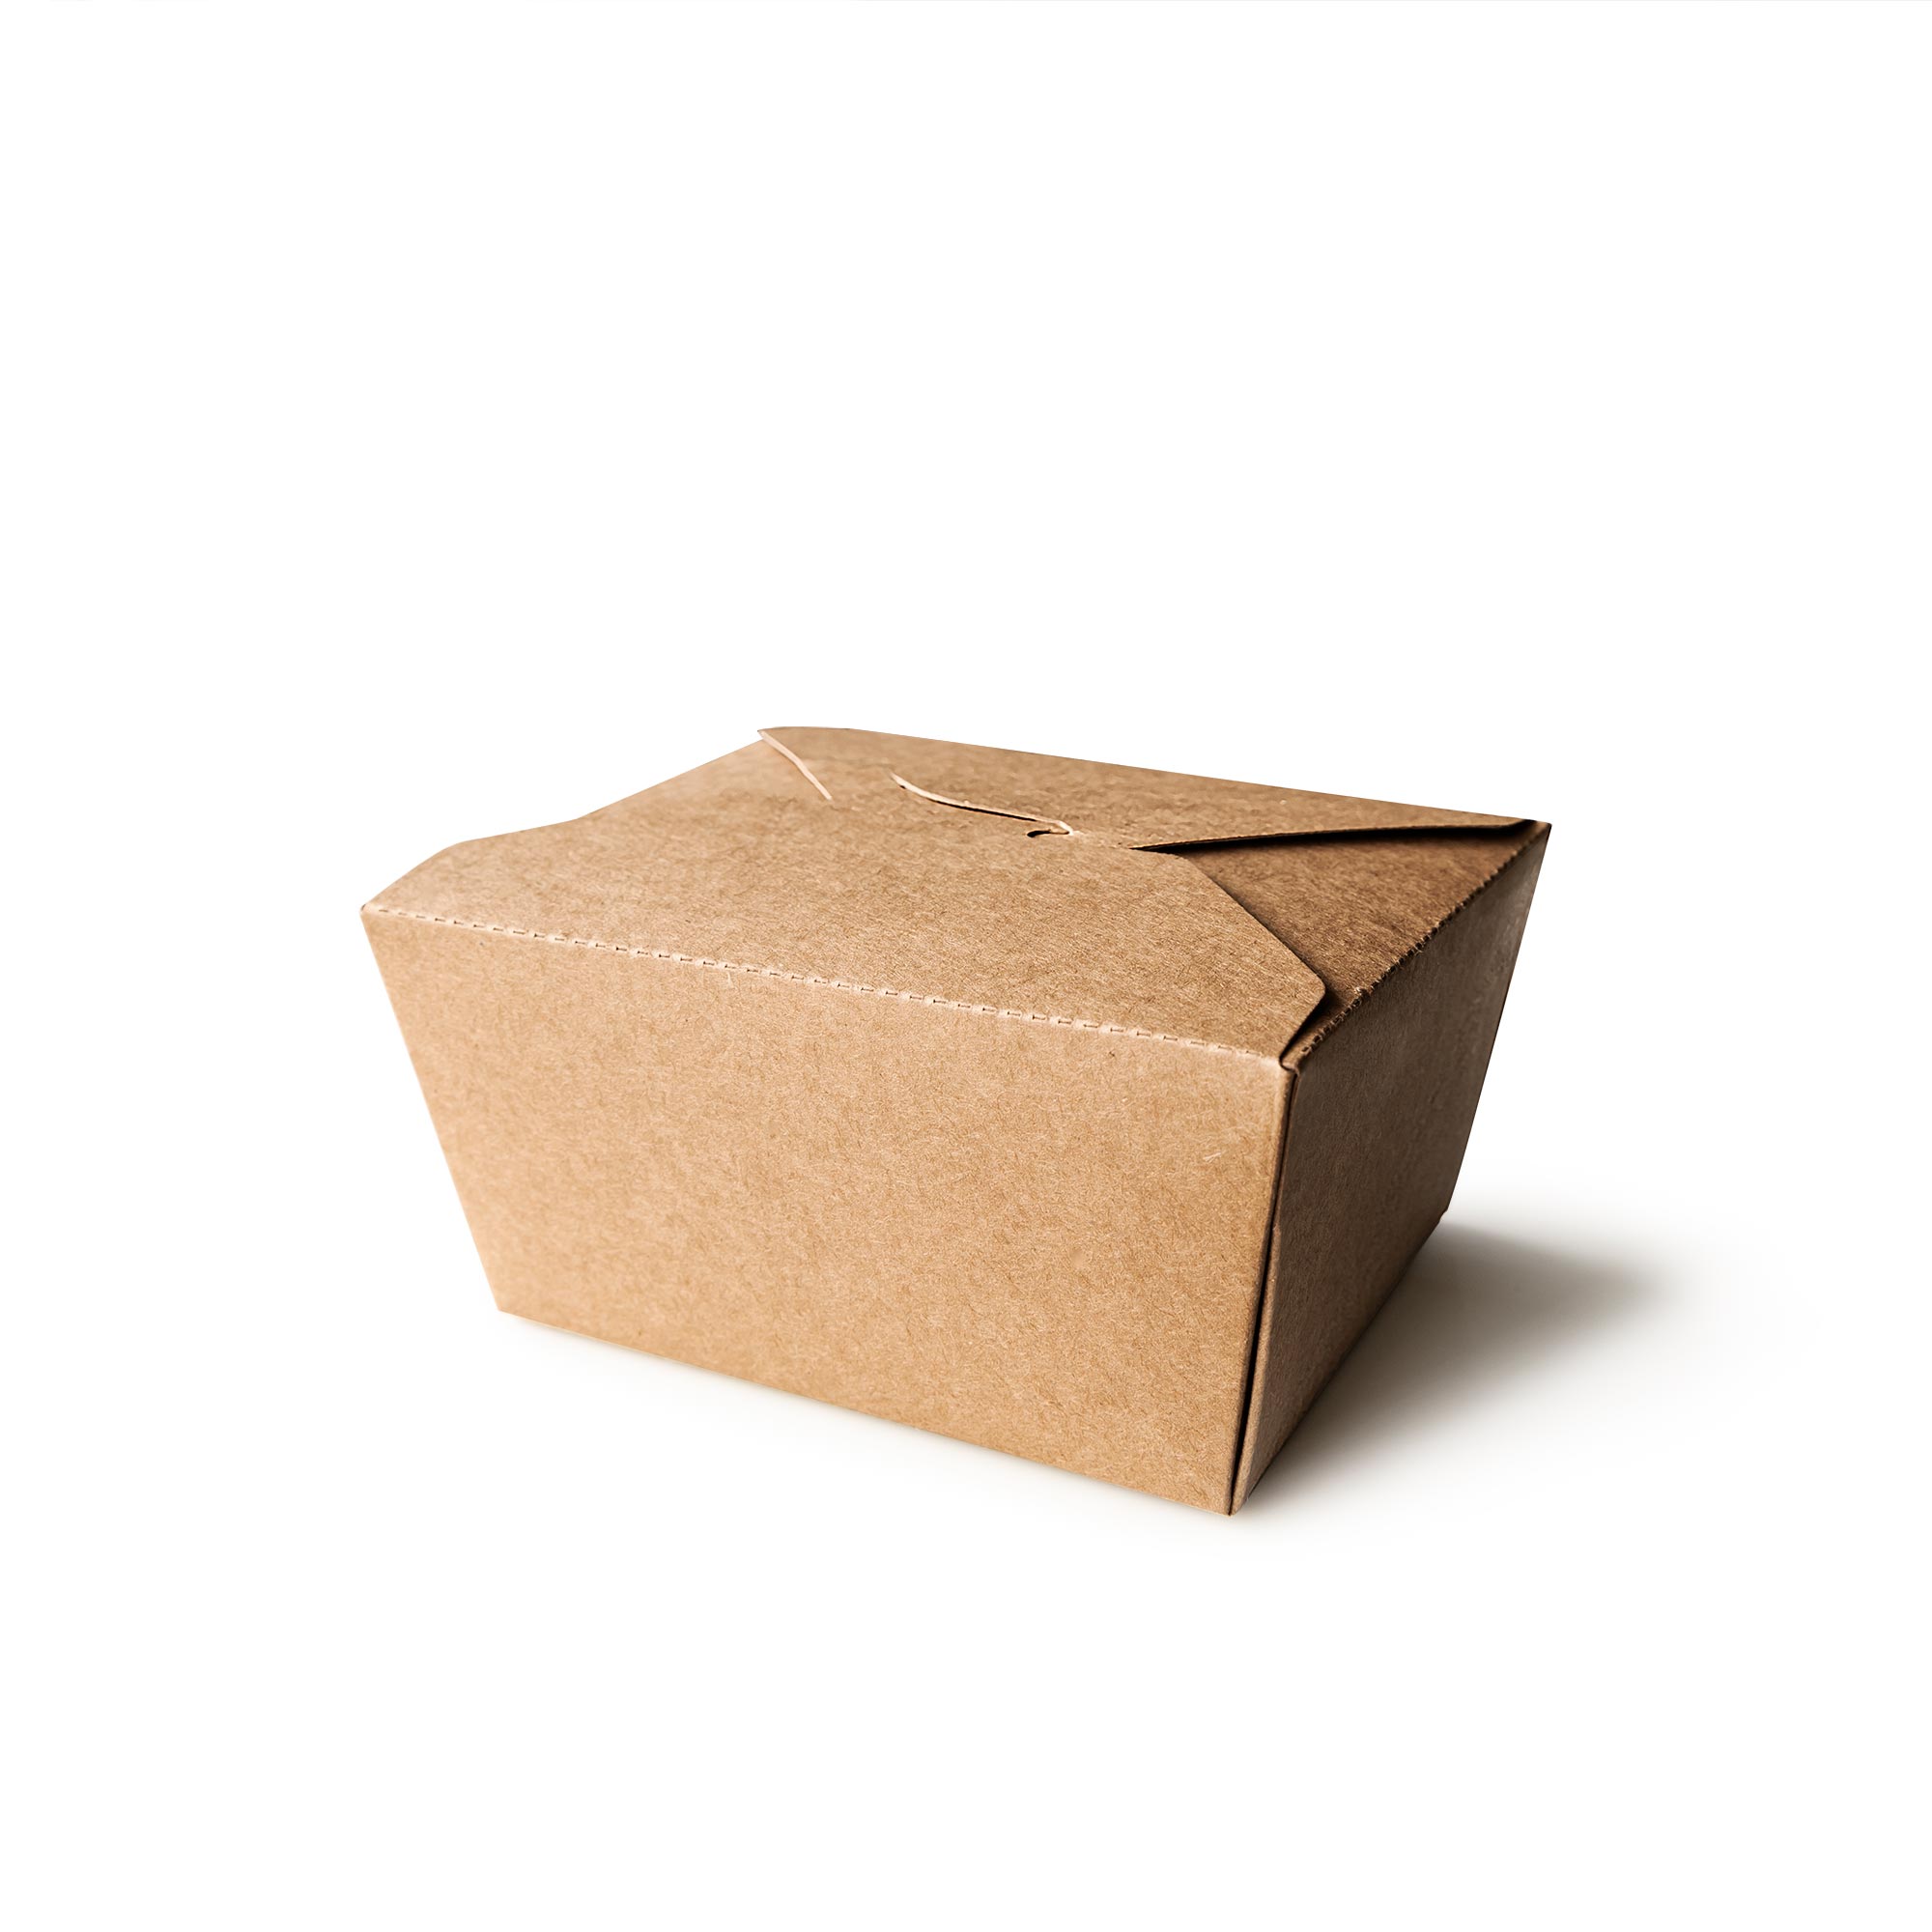 https://cdn.ready-market.com.tw/bac6eec5/Templates/pic/tairchu-800ml-rectangle-takeout-rice-container.jpg?v=88b3d652